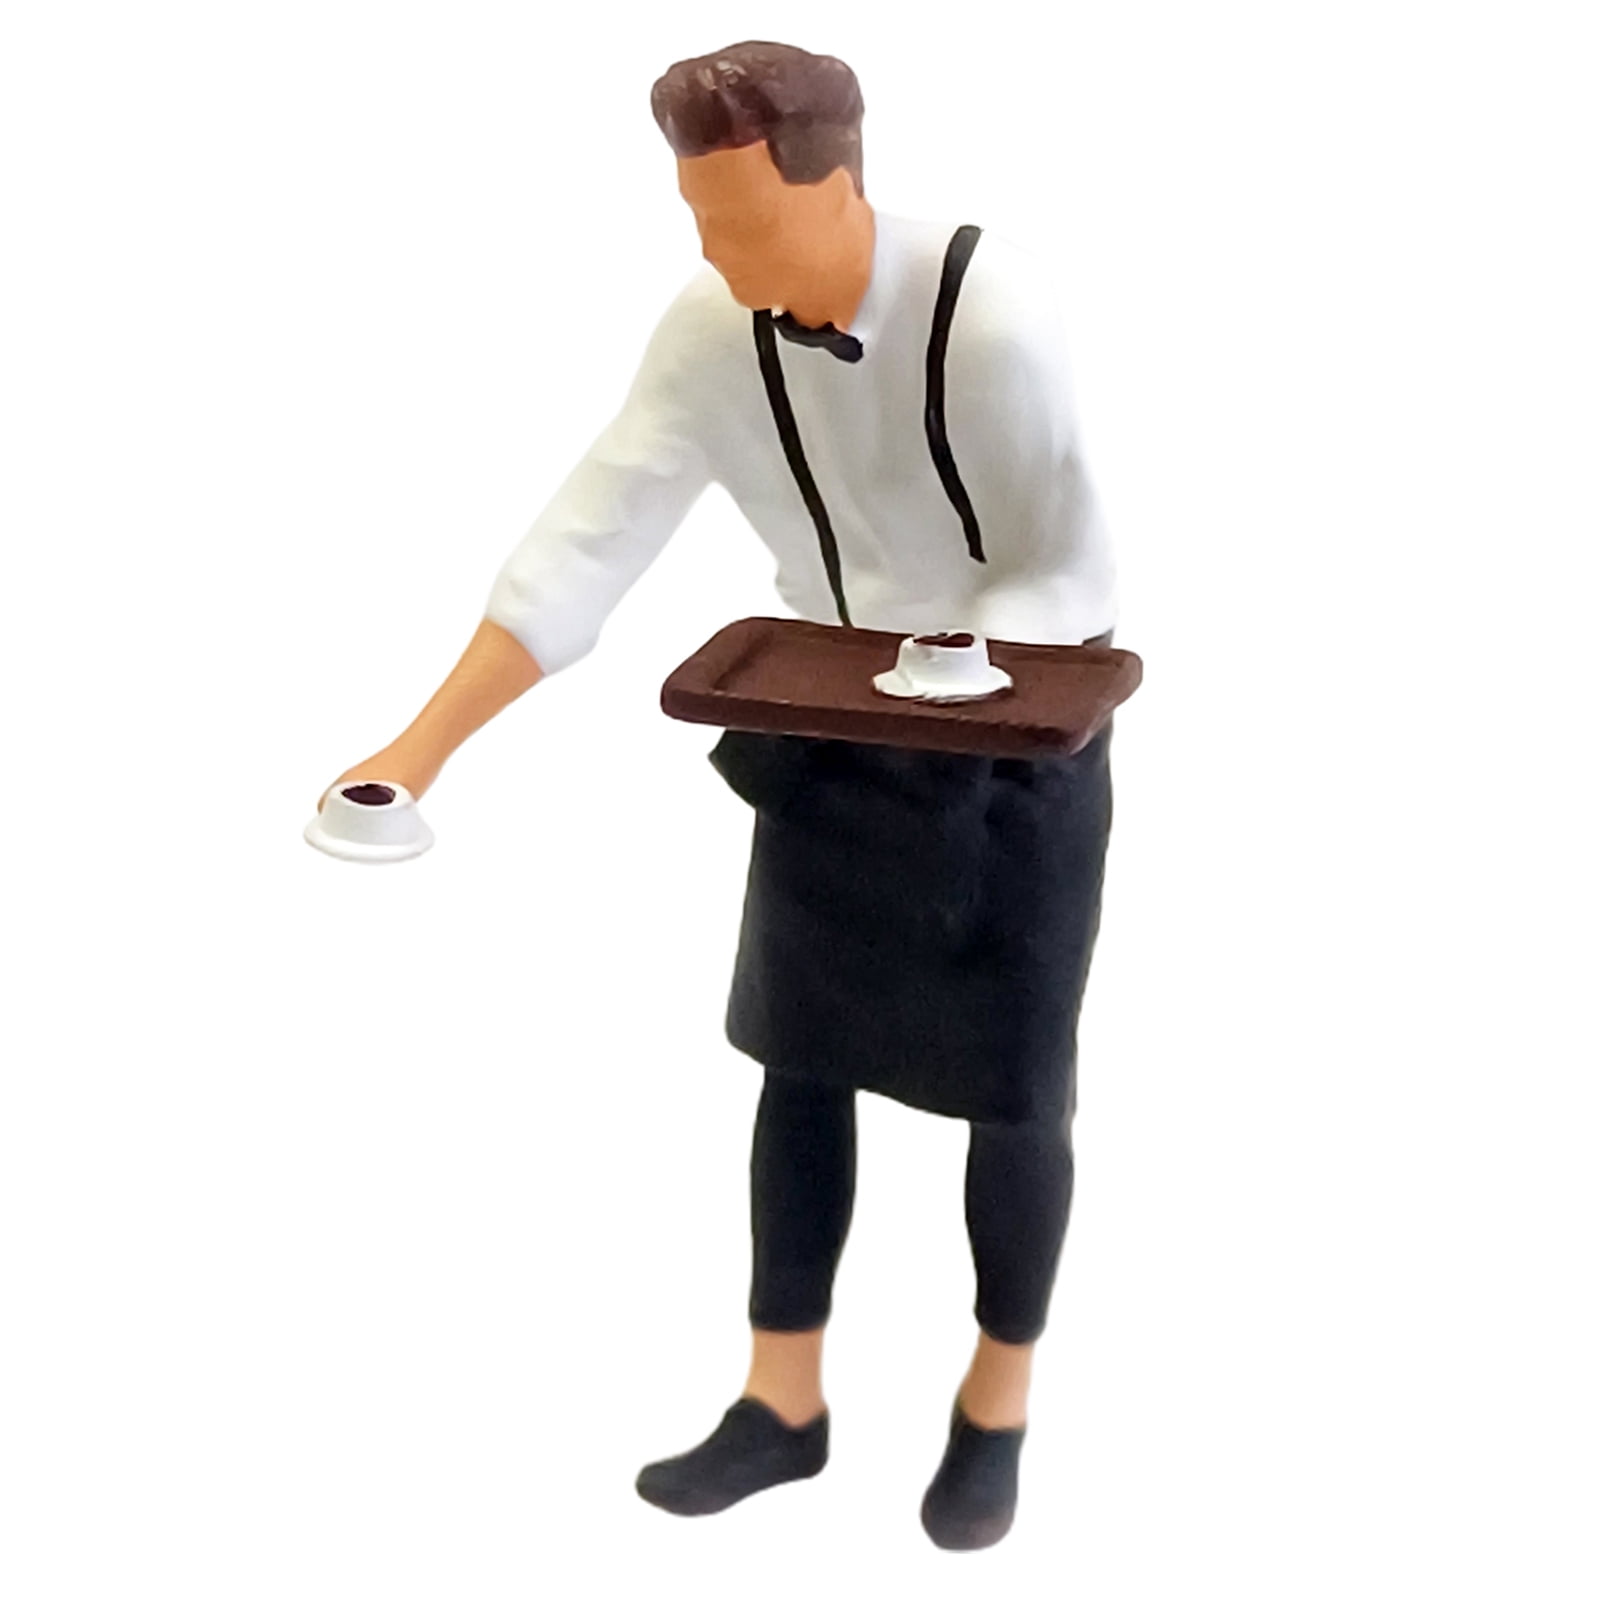 People Figurines 1:64 Scale Chef Figures Model Trains Architectural People 